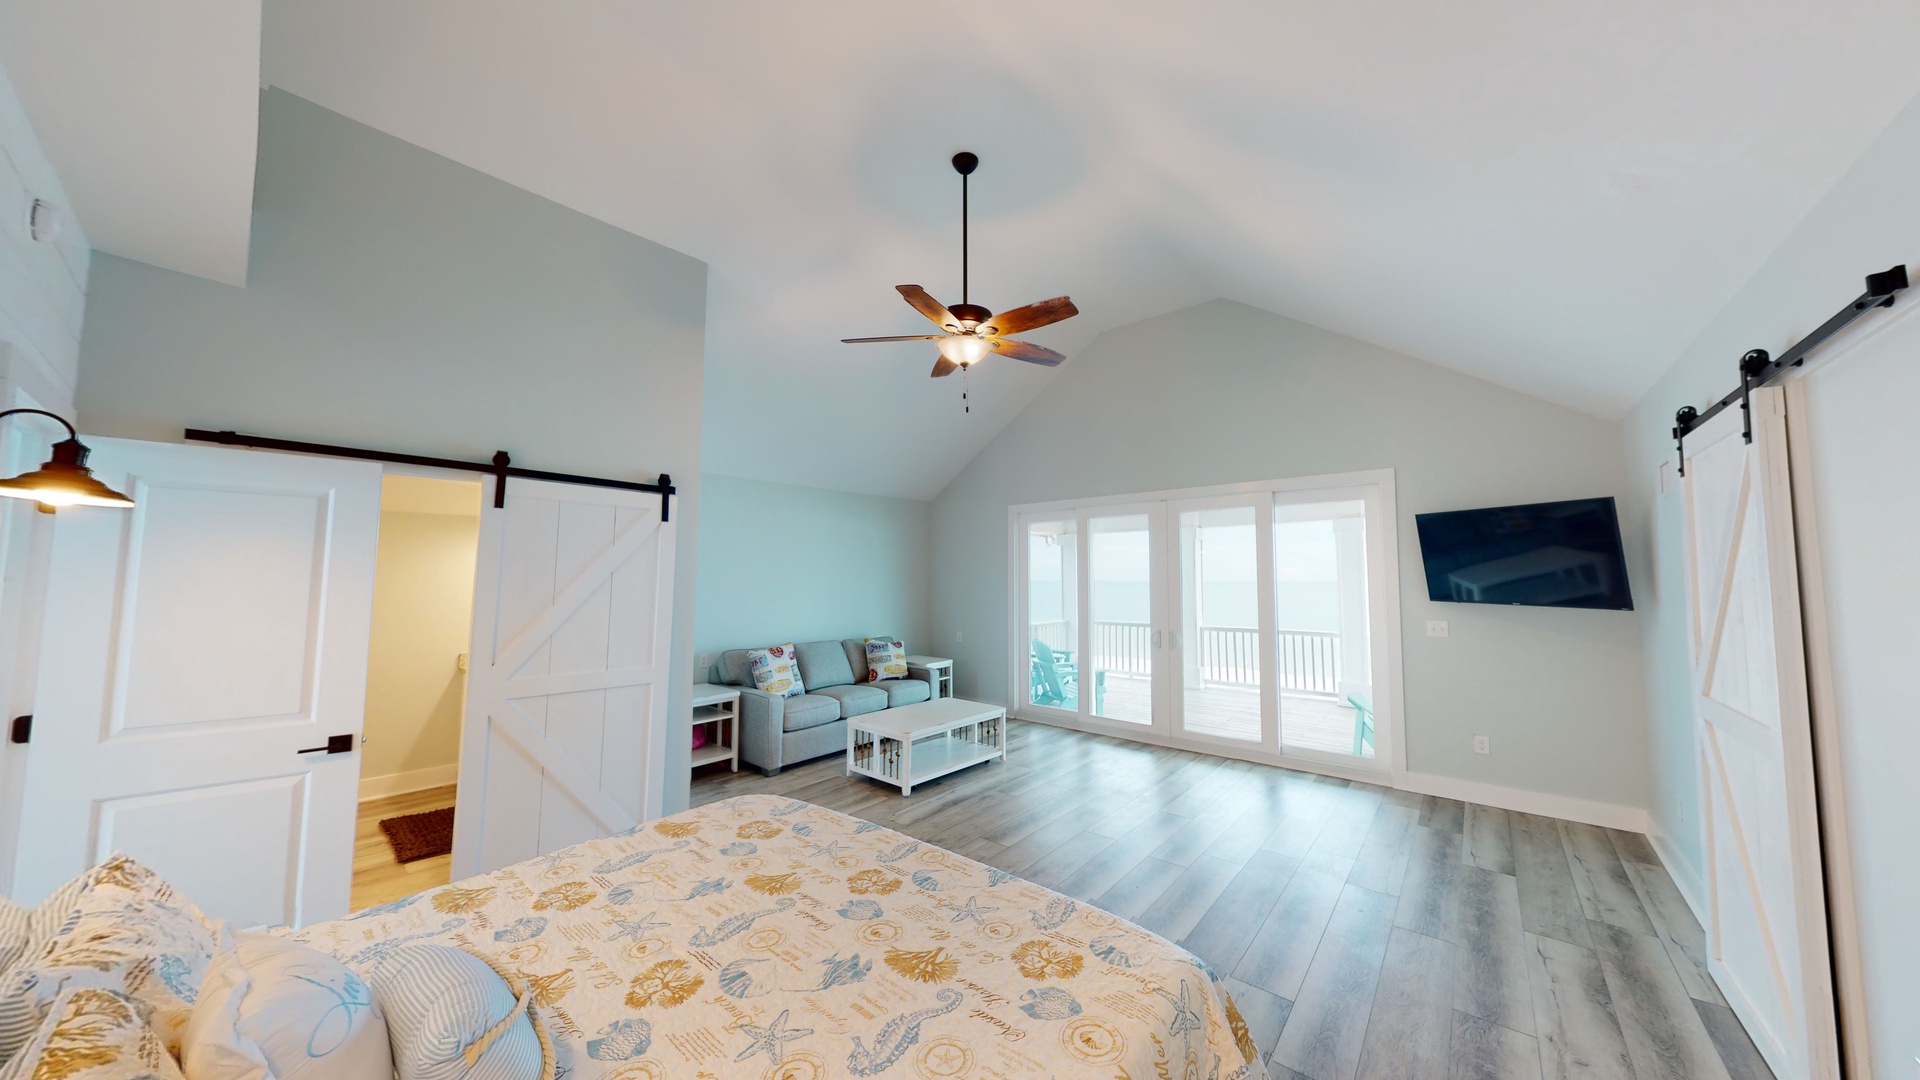 3rd floor Master bedroom with a king bed, TV and ceiling fan